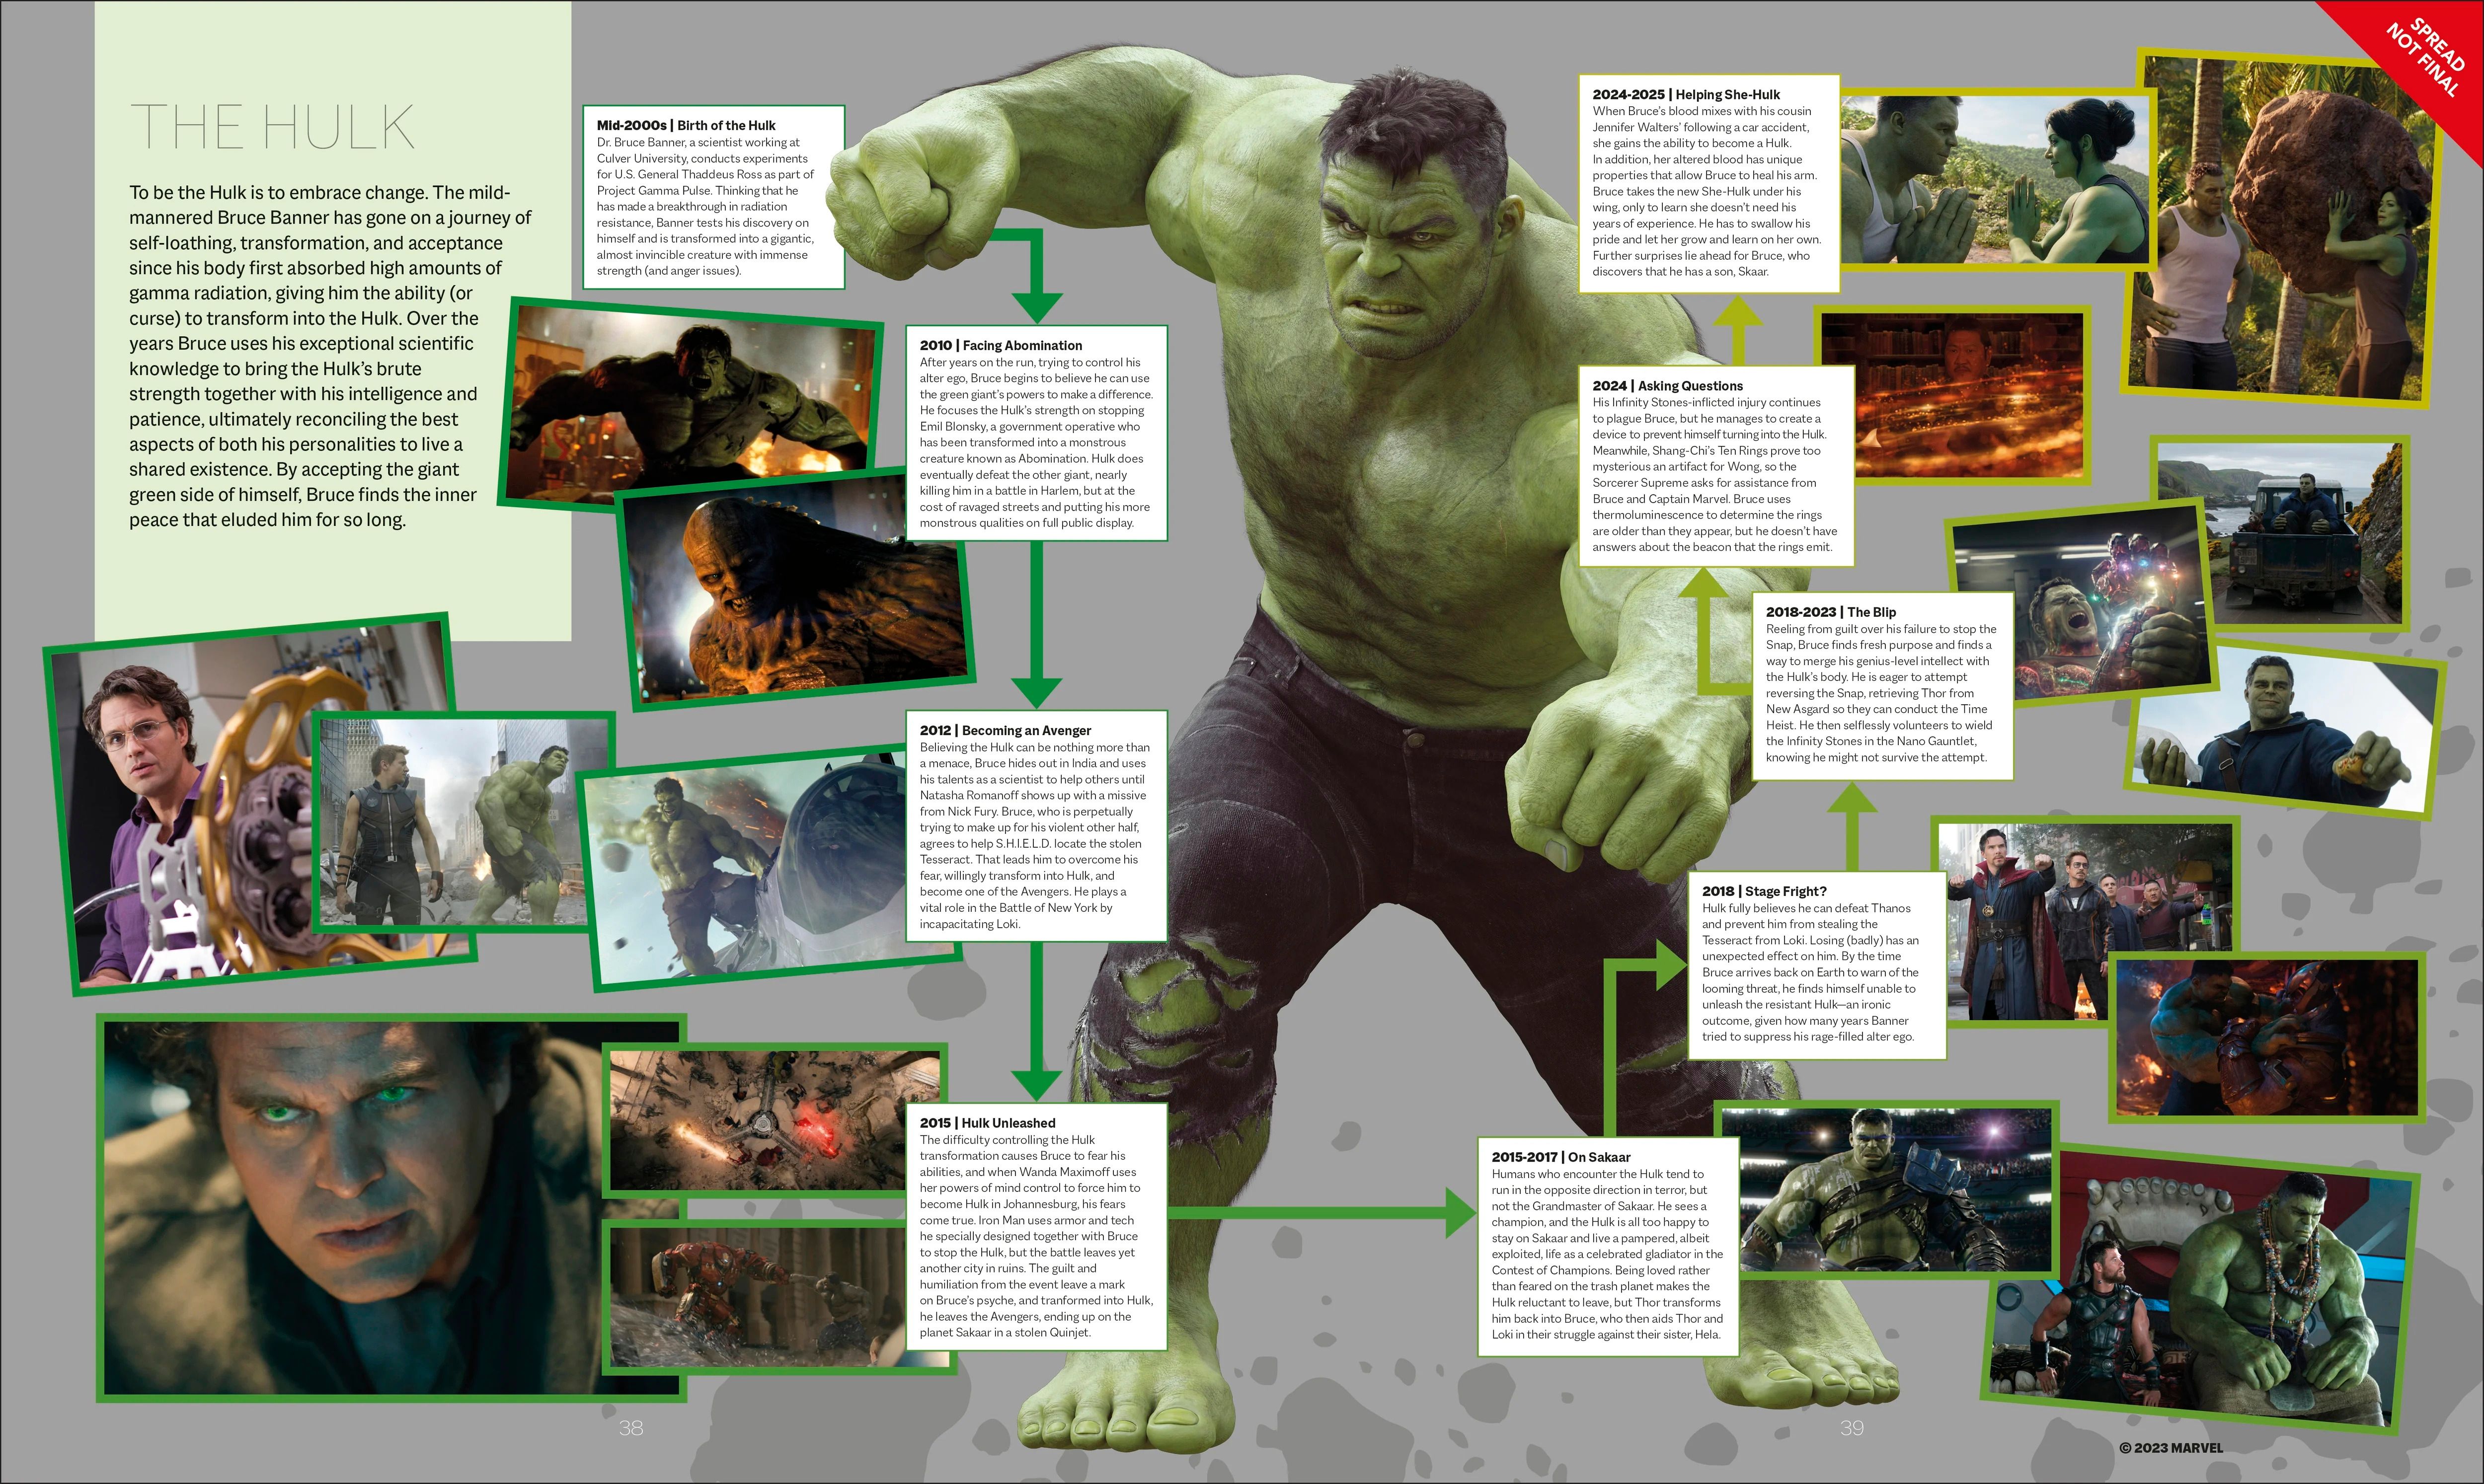 A sample page from Marvel Studios The Marvel Cinematic Universe An Official Timeline, showing Hulk's timeline journey in the MCU.